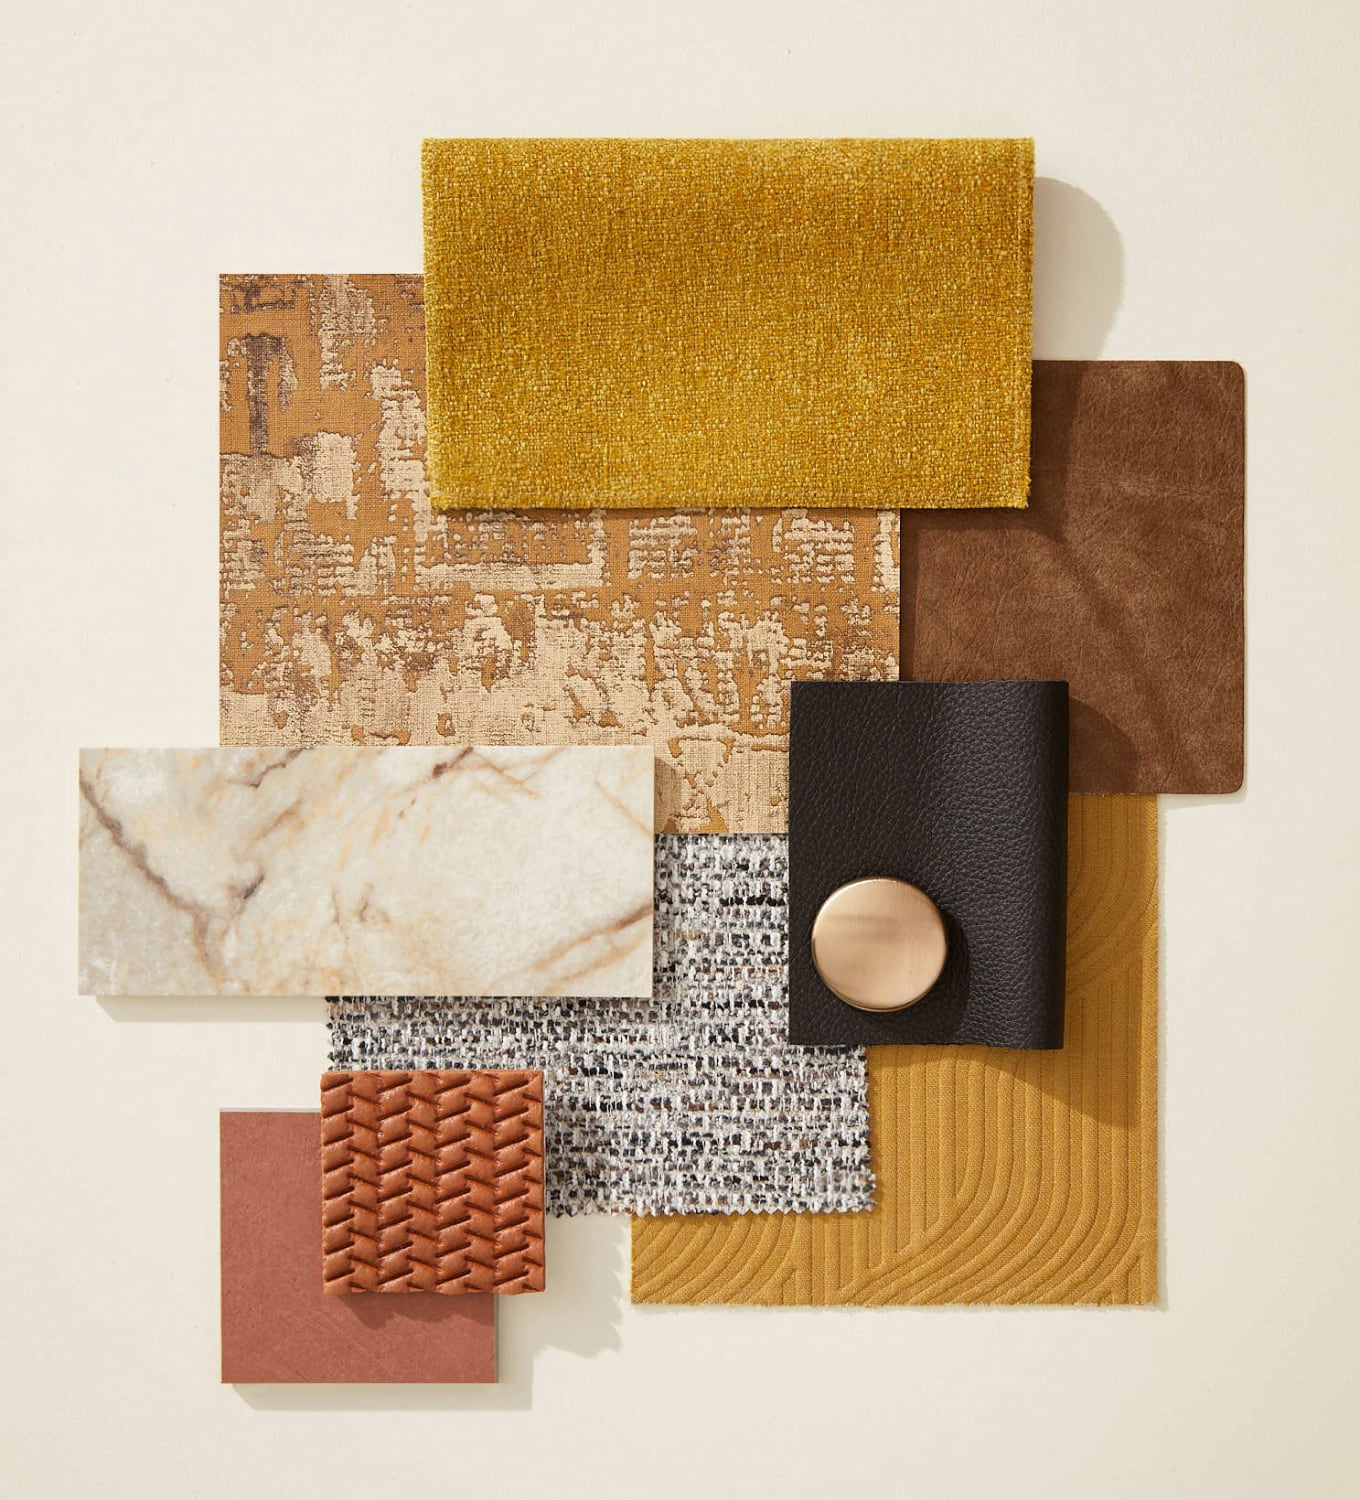 The material wall